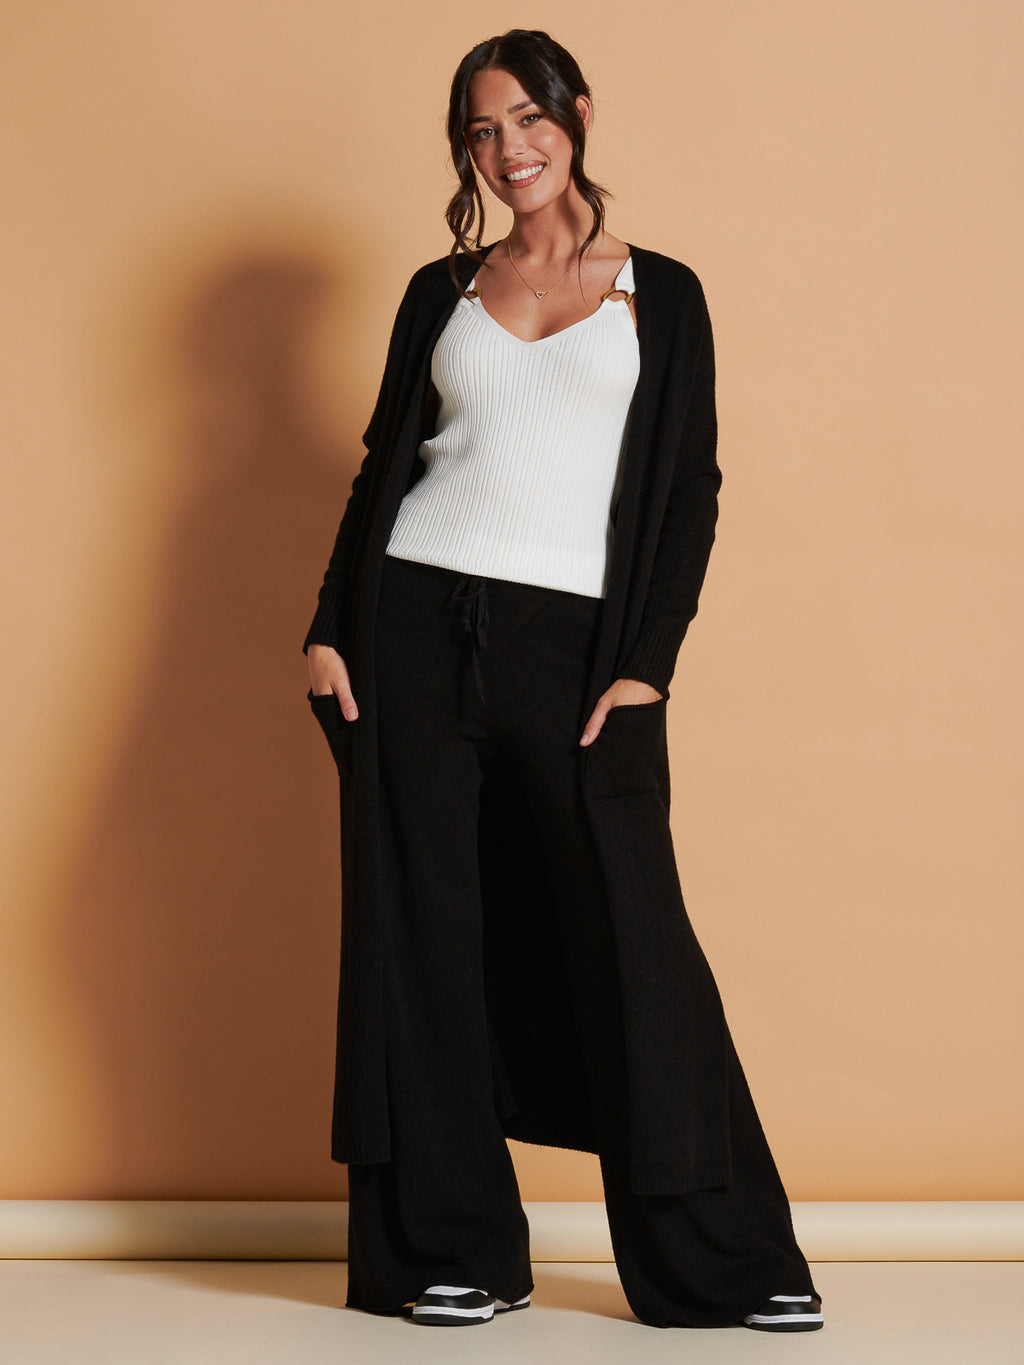 3Pc Fine Knit Long Cardigan With Cami & Leggings - Buy Fashion Wholesale in  The UK